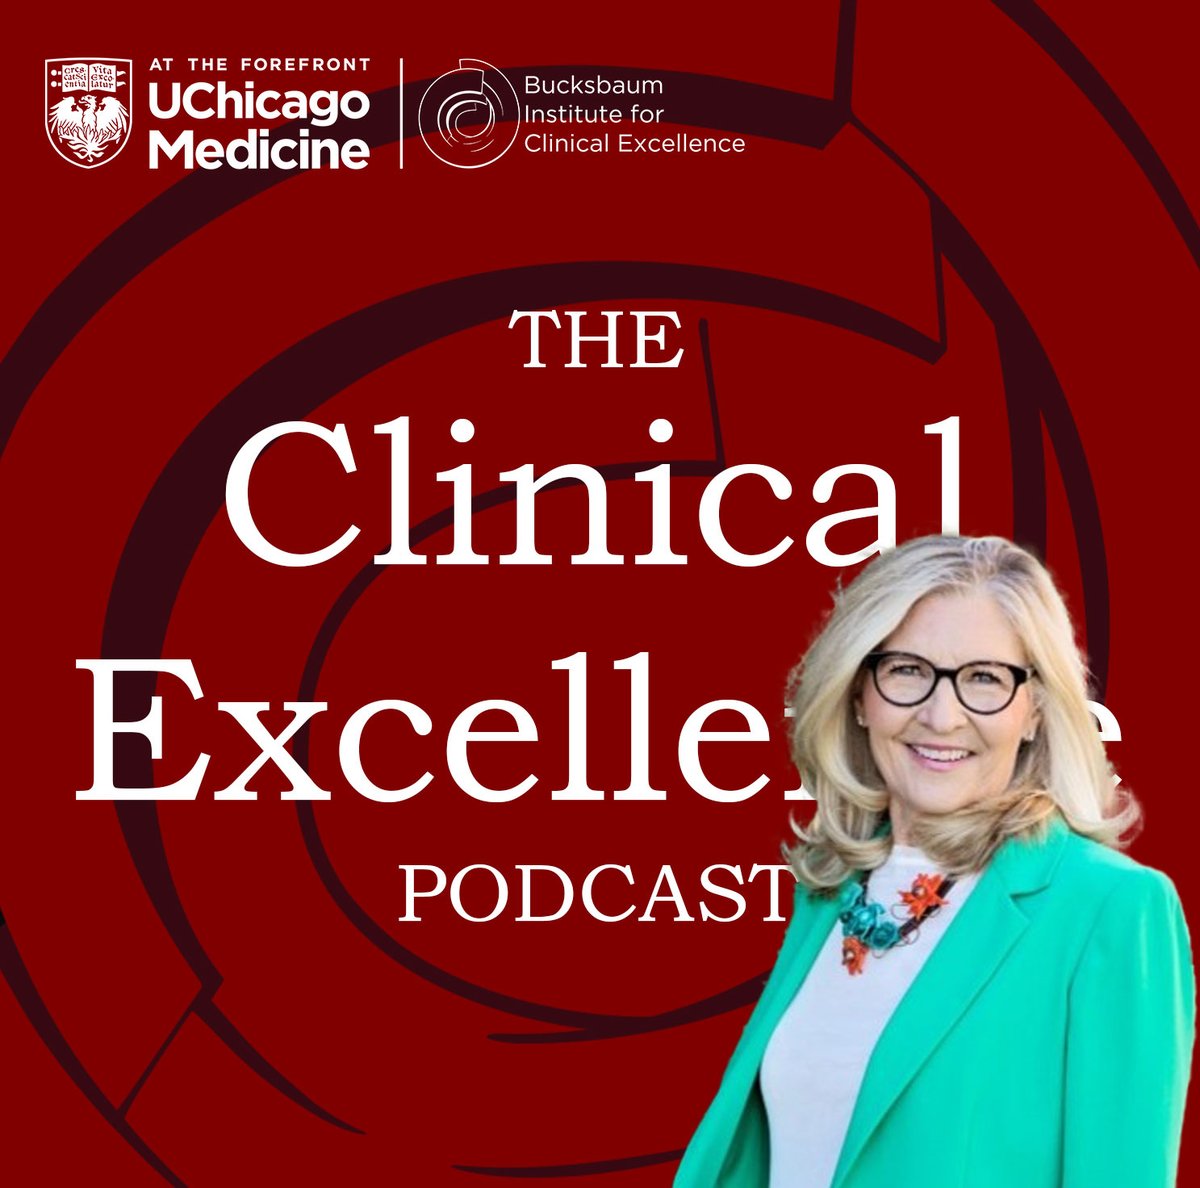 Released today: Join Dr. @adamcifu and Diane Rogers, CEO of @contagiouschang, discuss physician coaching to improve clinical relationships on the Clinical Excellence Podcast! bucksbauminstitute.uchicago.edu/programming/cl… #MedTwitter #podcasts #clinicalexcellence